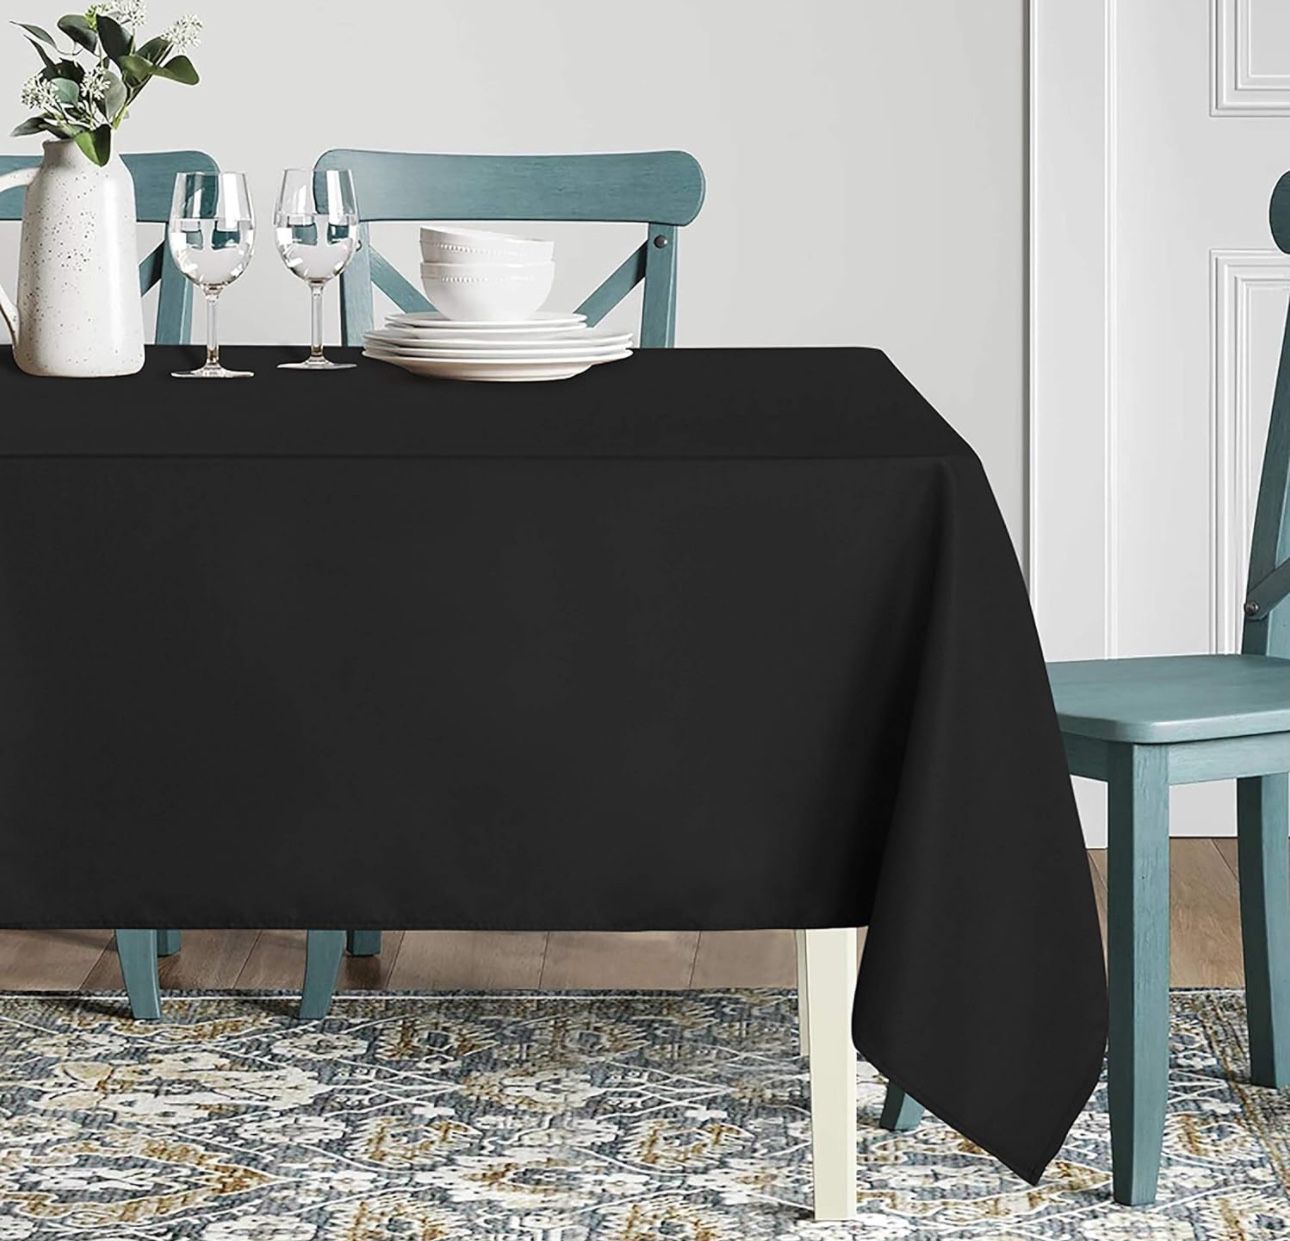 sancua Rectangle Tablecloth - 90 x 156 Inch - Water Resistant Spill Proof Washable Polyester Table Cloth, Decorative Fabric Table Cover for Dining Tab